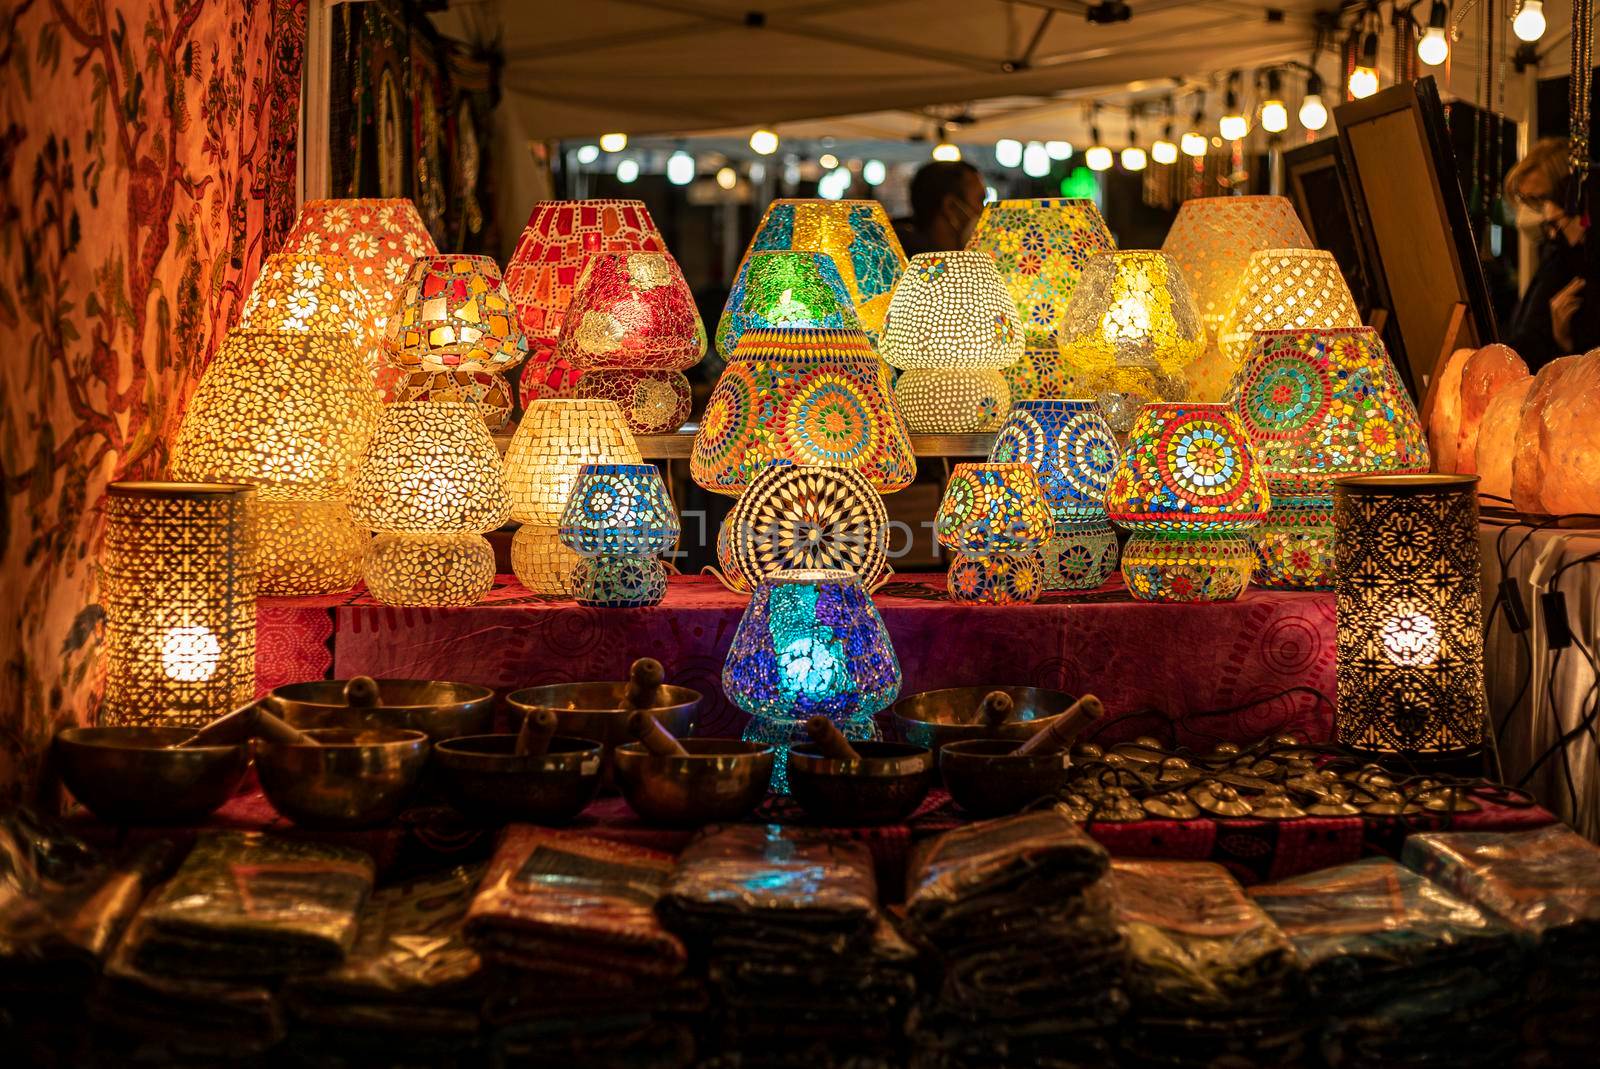 Arabic exhibition lamps detail in a market in the dark